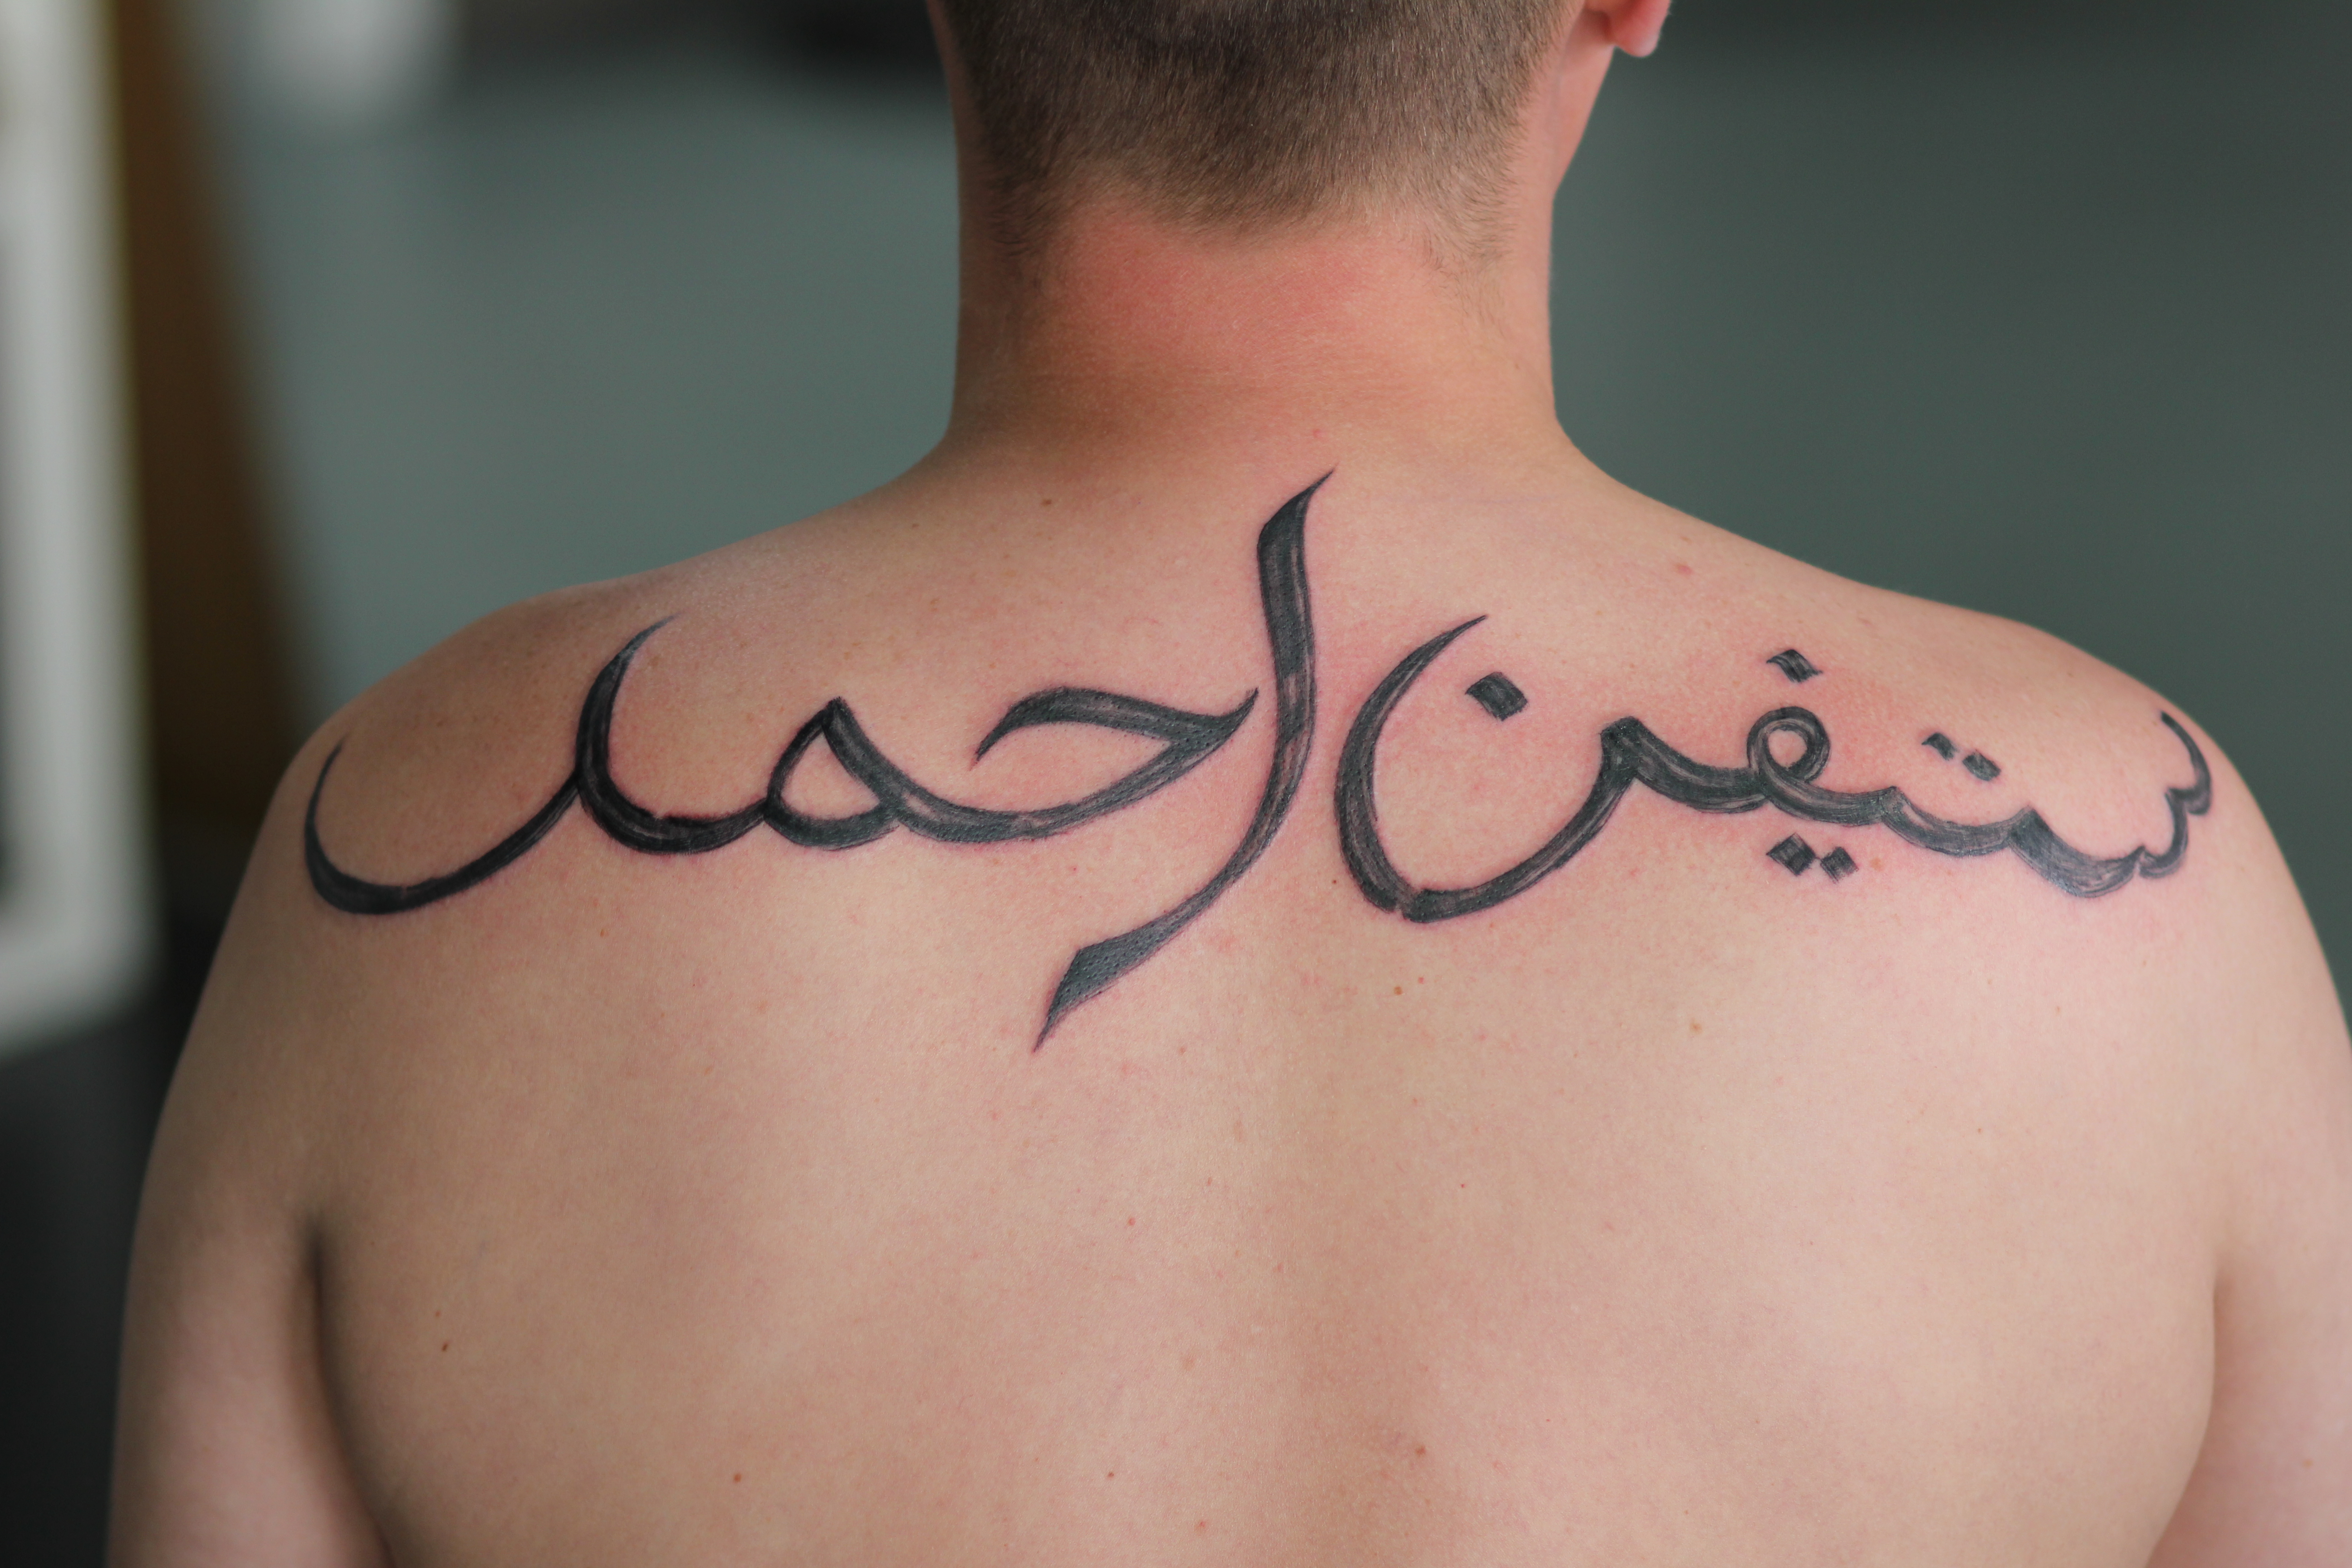 Funny Arabic Tattoos 16 Widescreen Wallpaper - Funnypicture.org